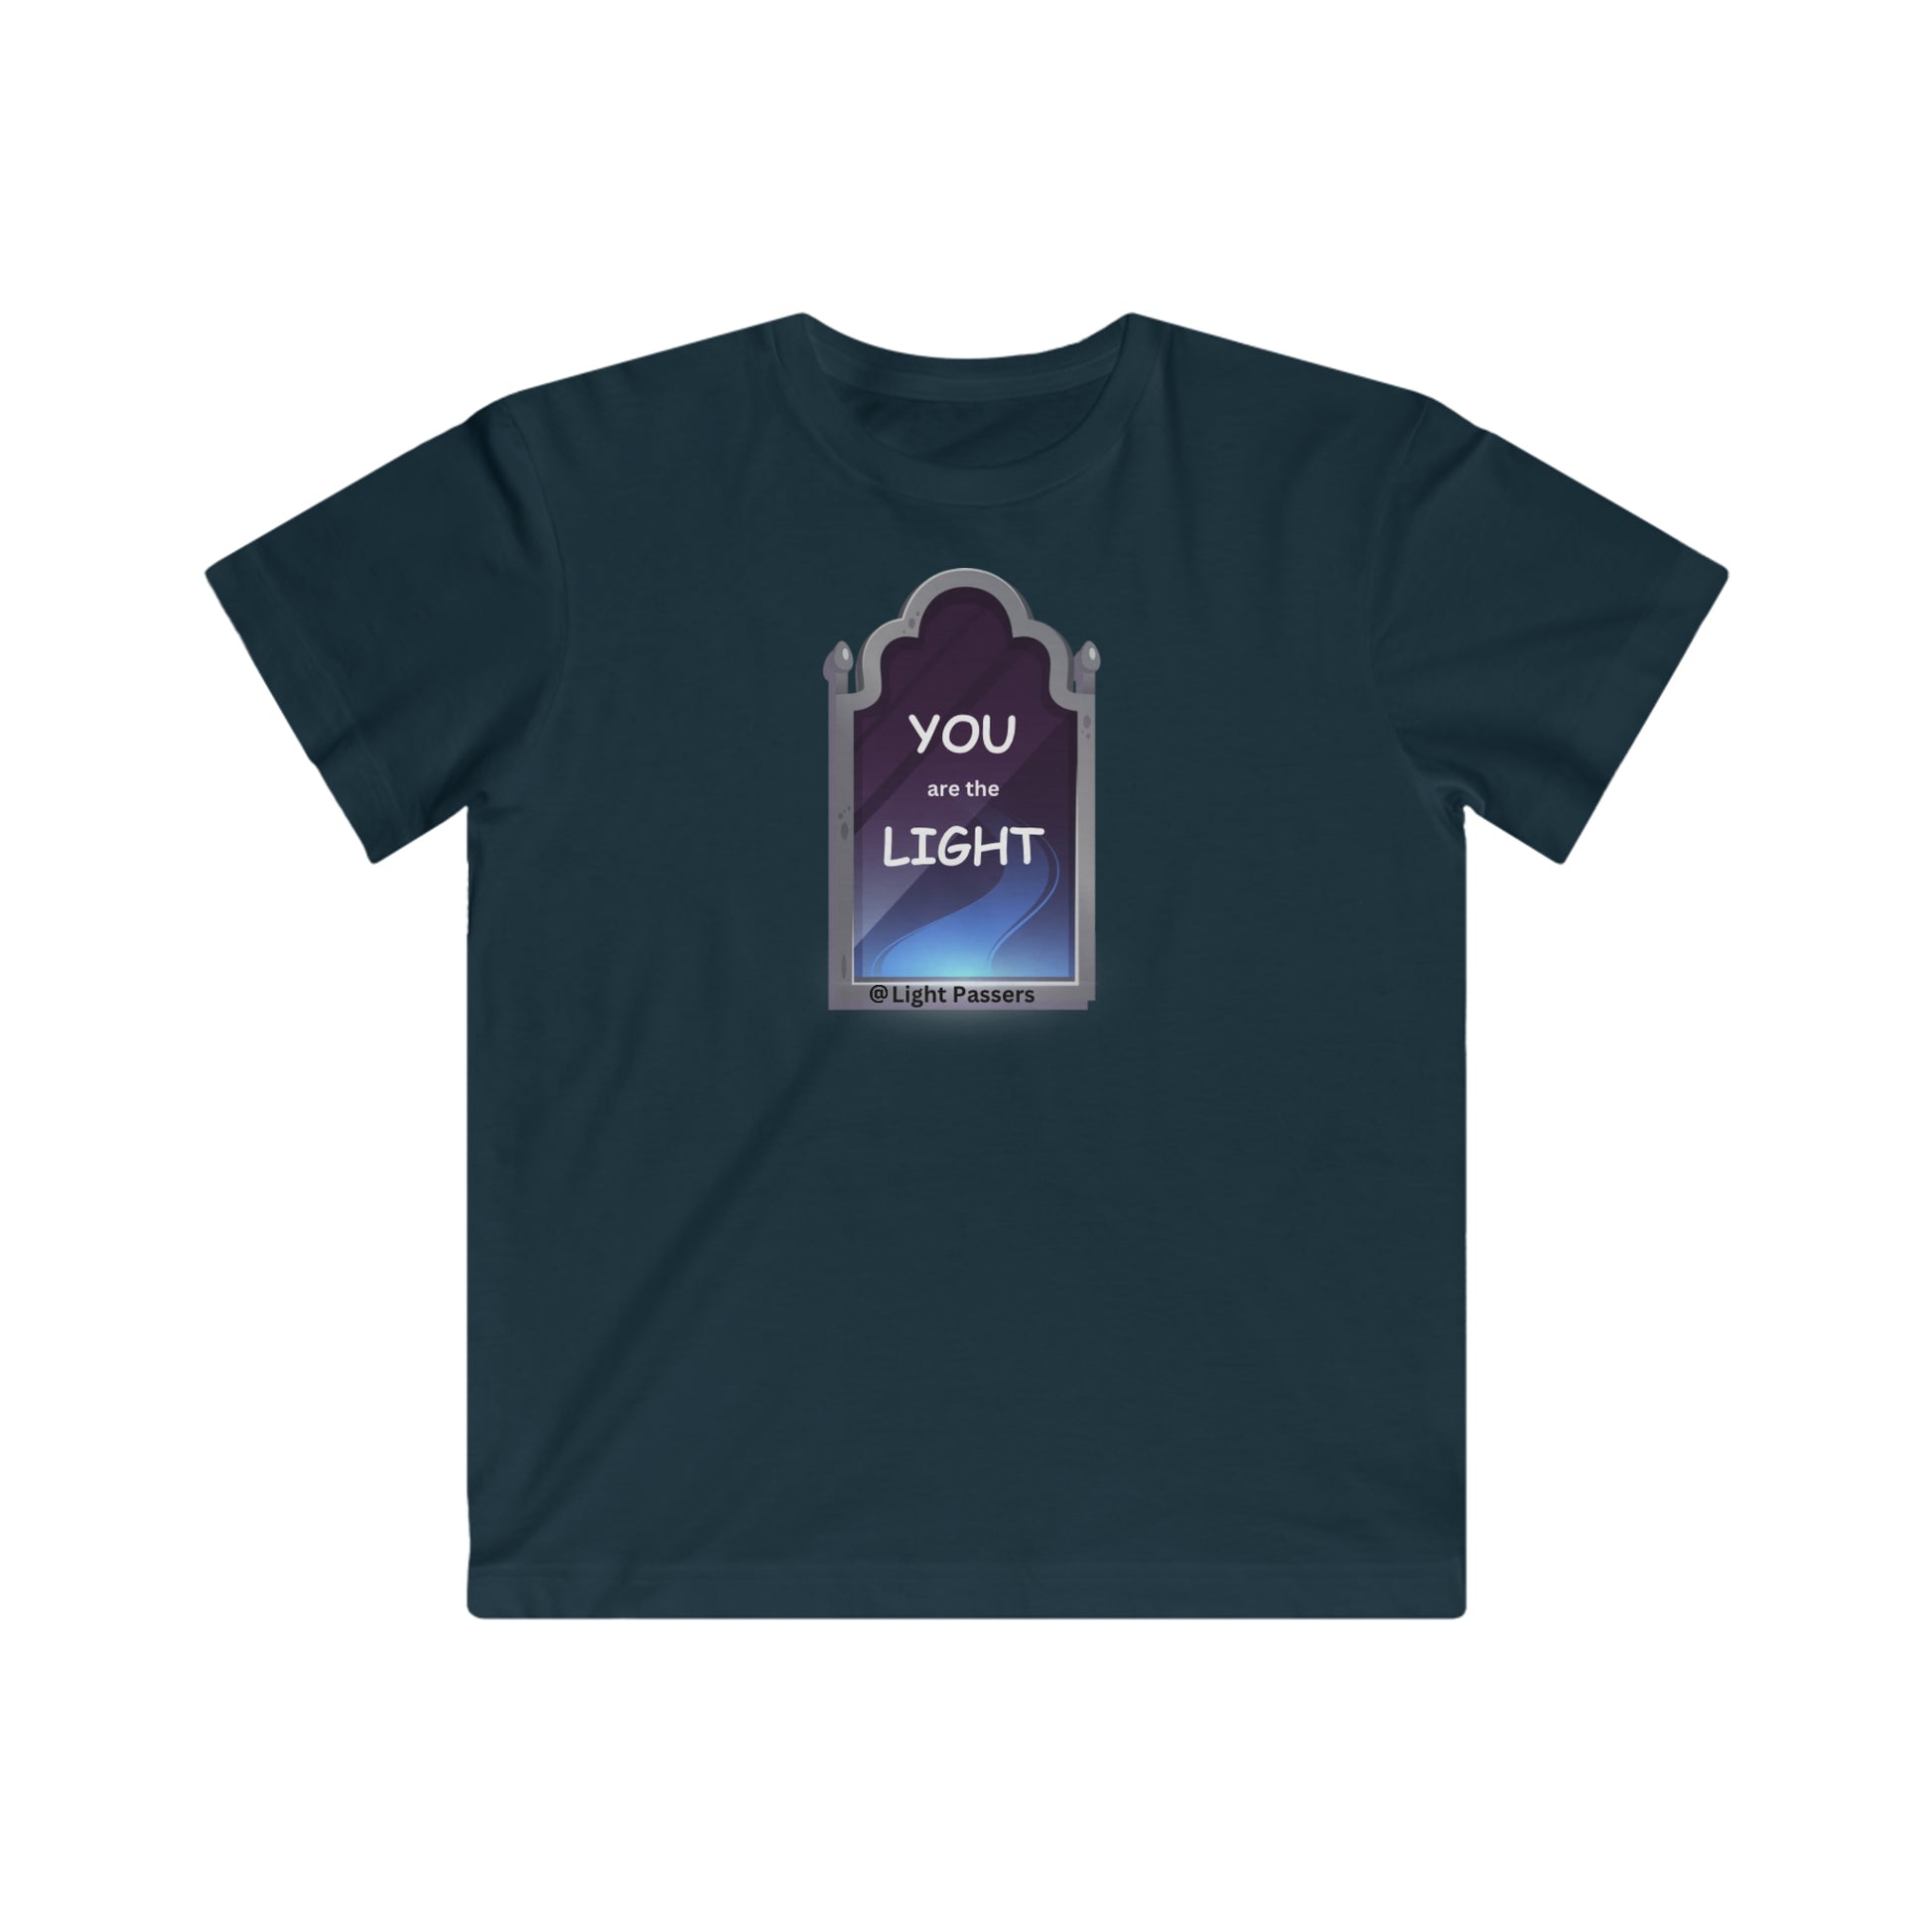 Youth t-shirt featuring a light pass graphic, made of soft combed ringspun cotton, 4.5 oz/yd² fabric, regular fit, tear away label, loved for its high-quality print.